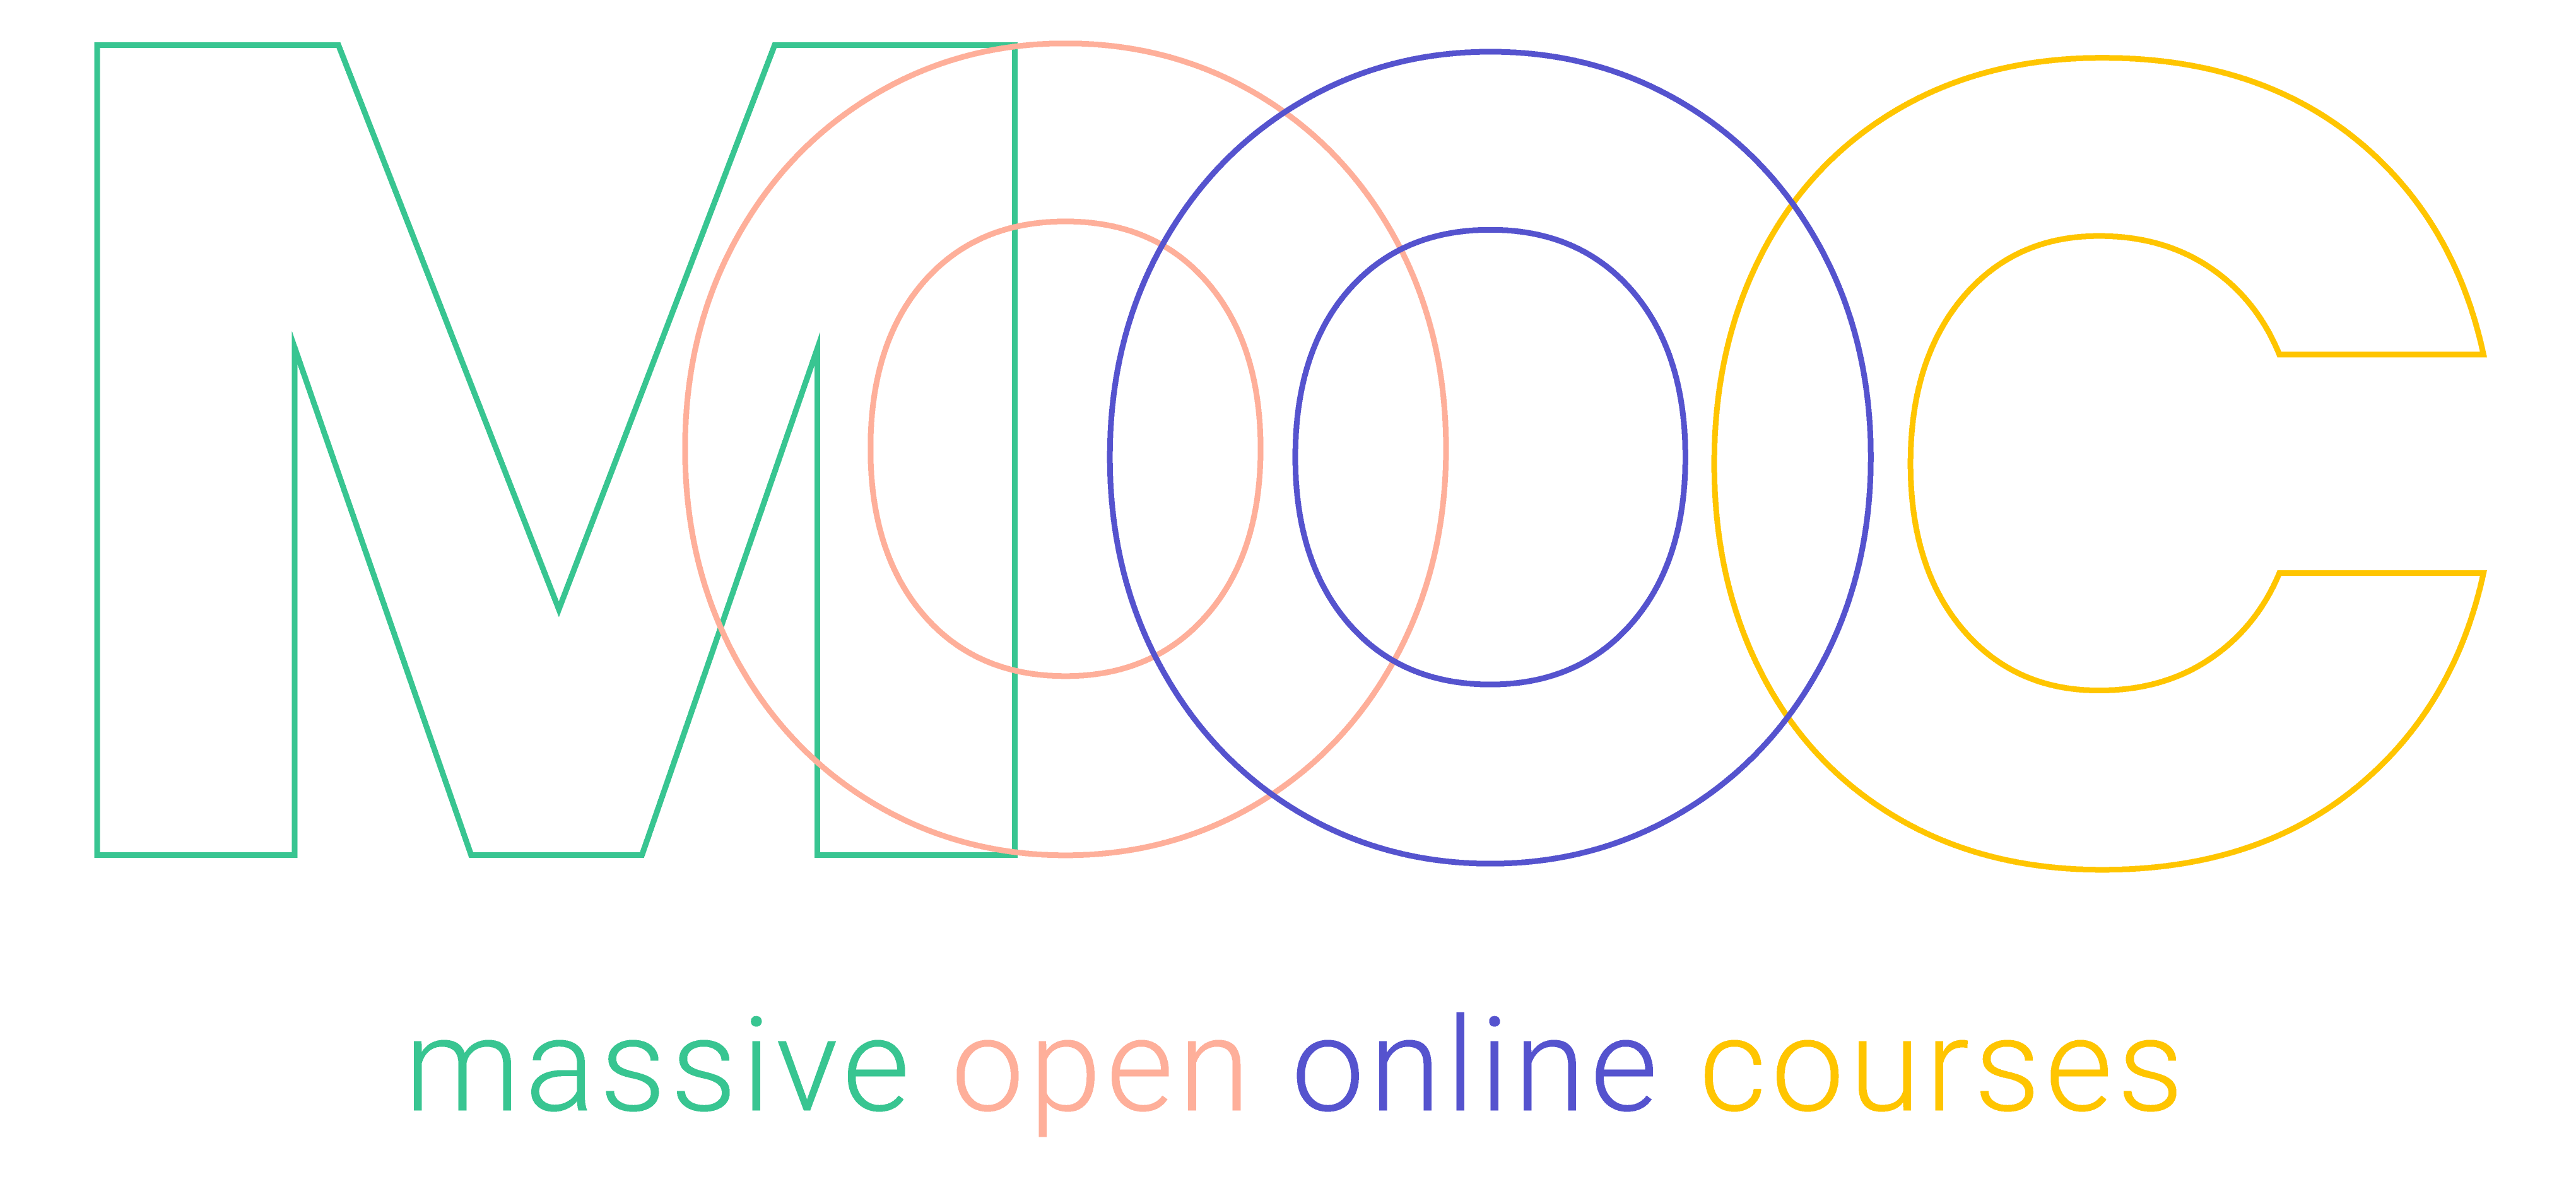 MOOC’s — new concept of learning